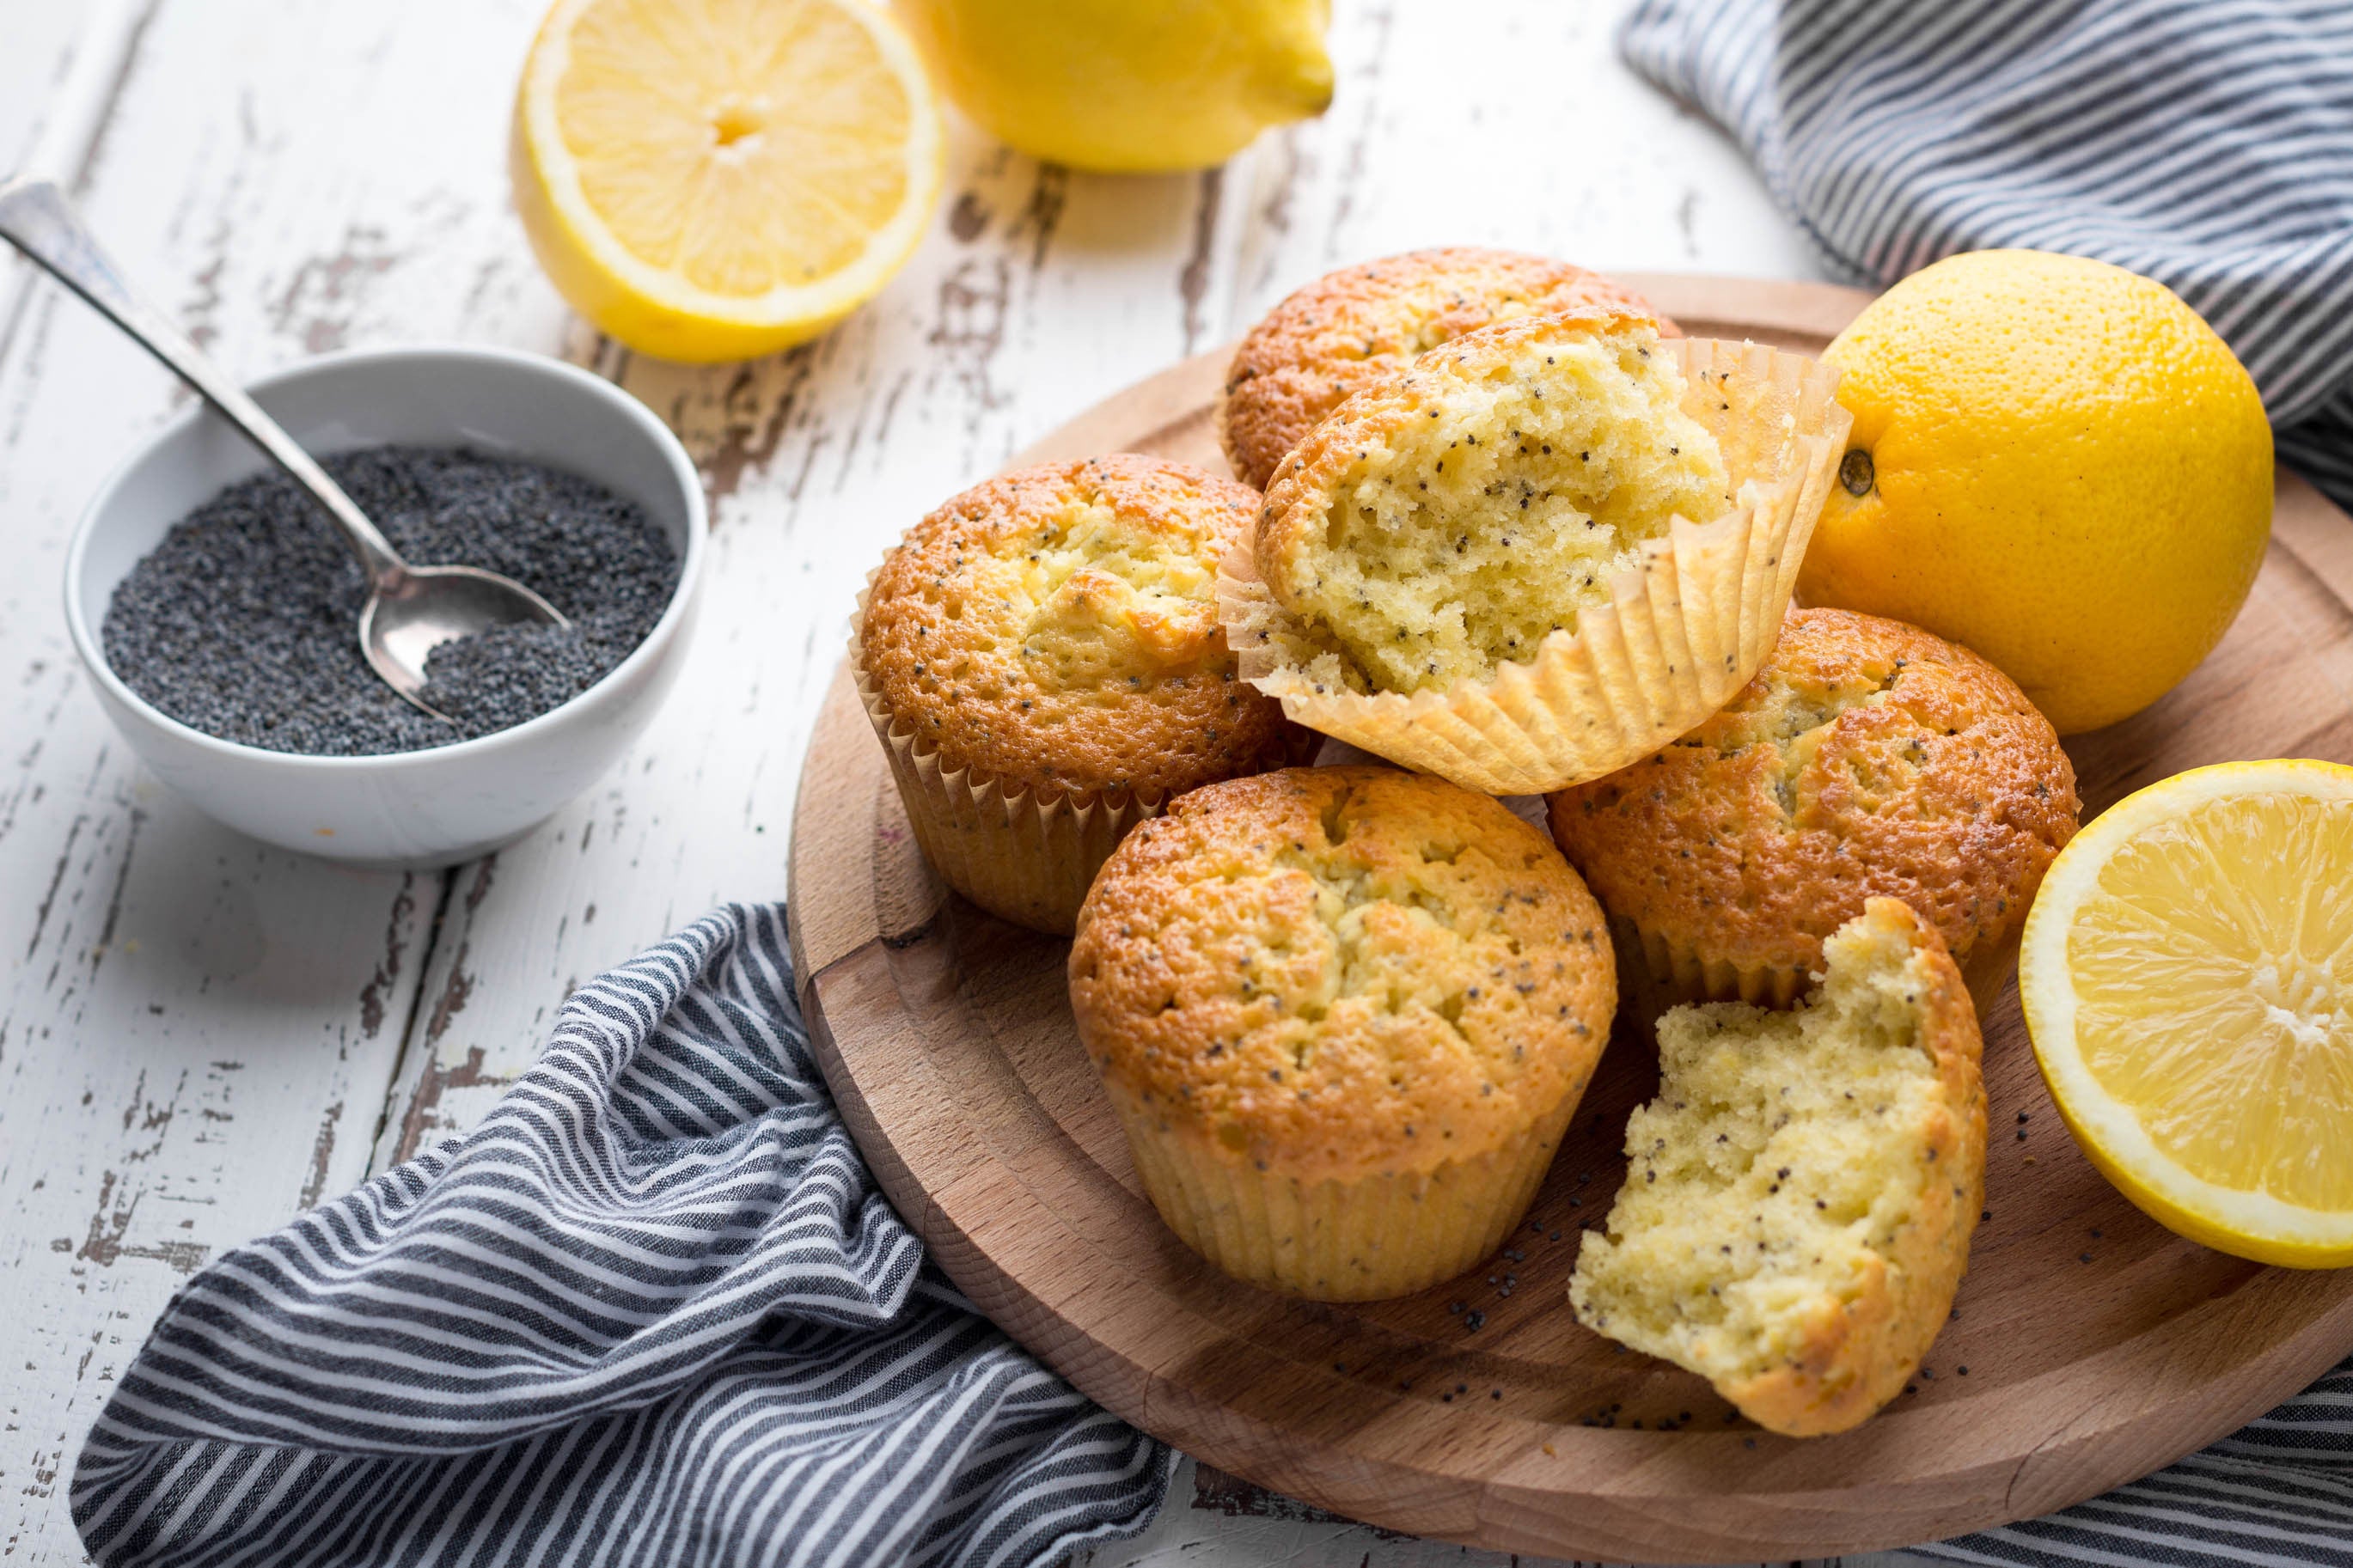 Lemon poppy seed muffins on a wooden chopping board next to a bowl of poppy seeds